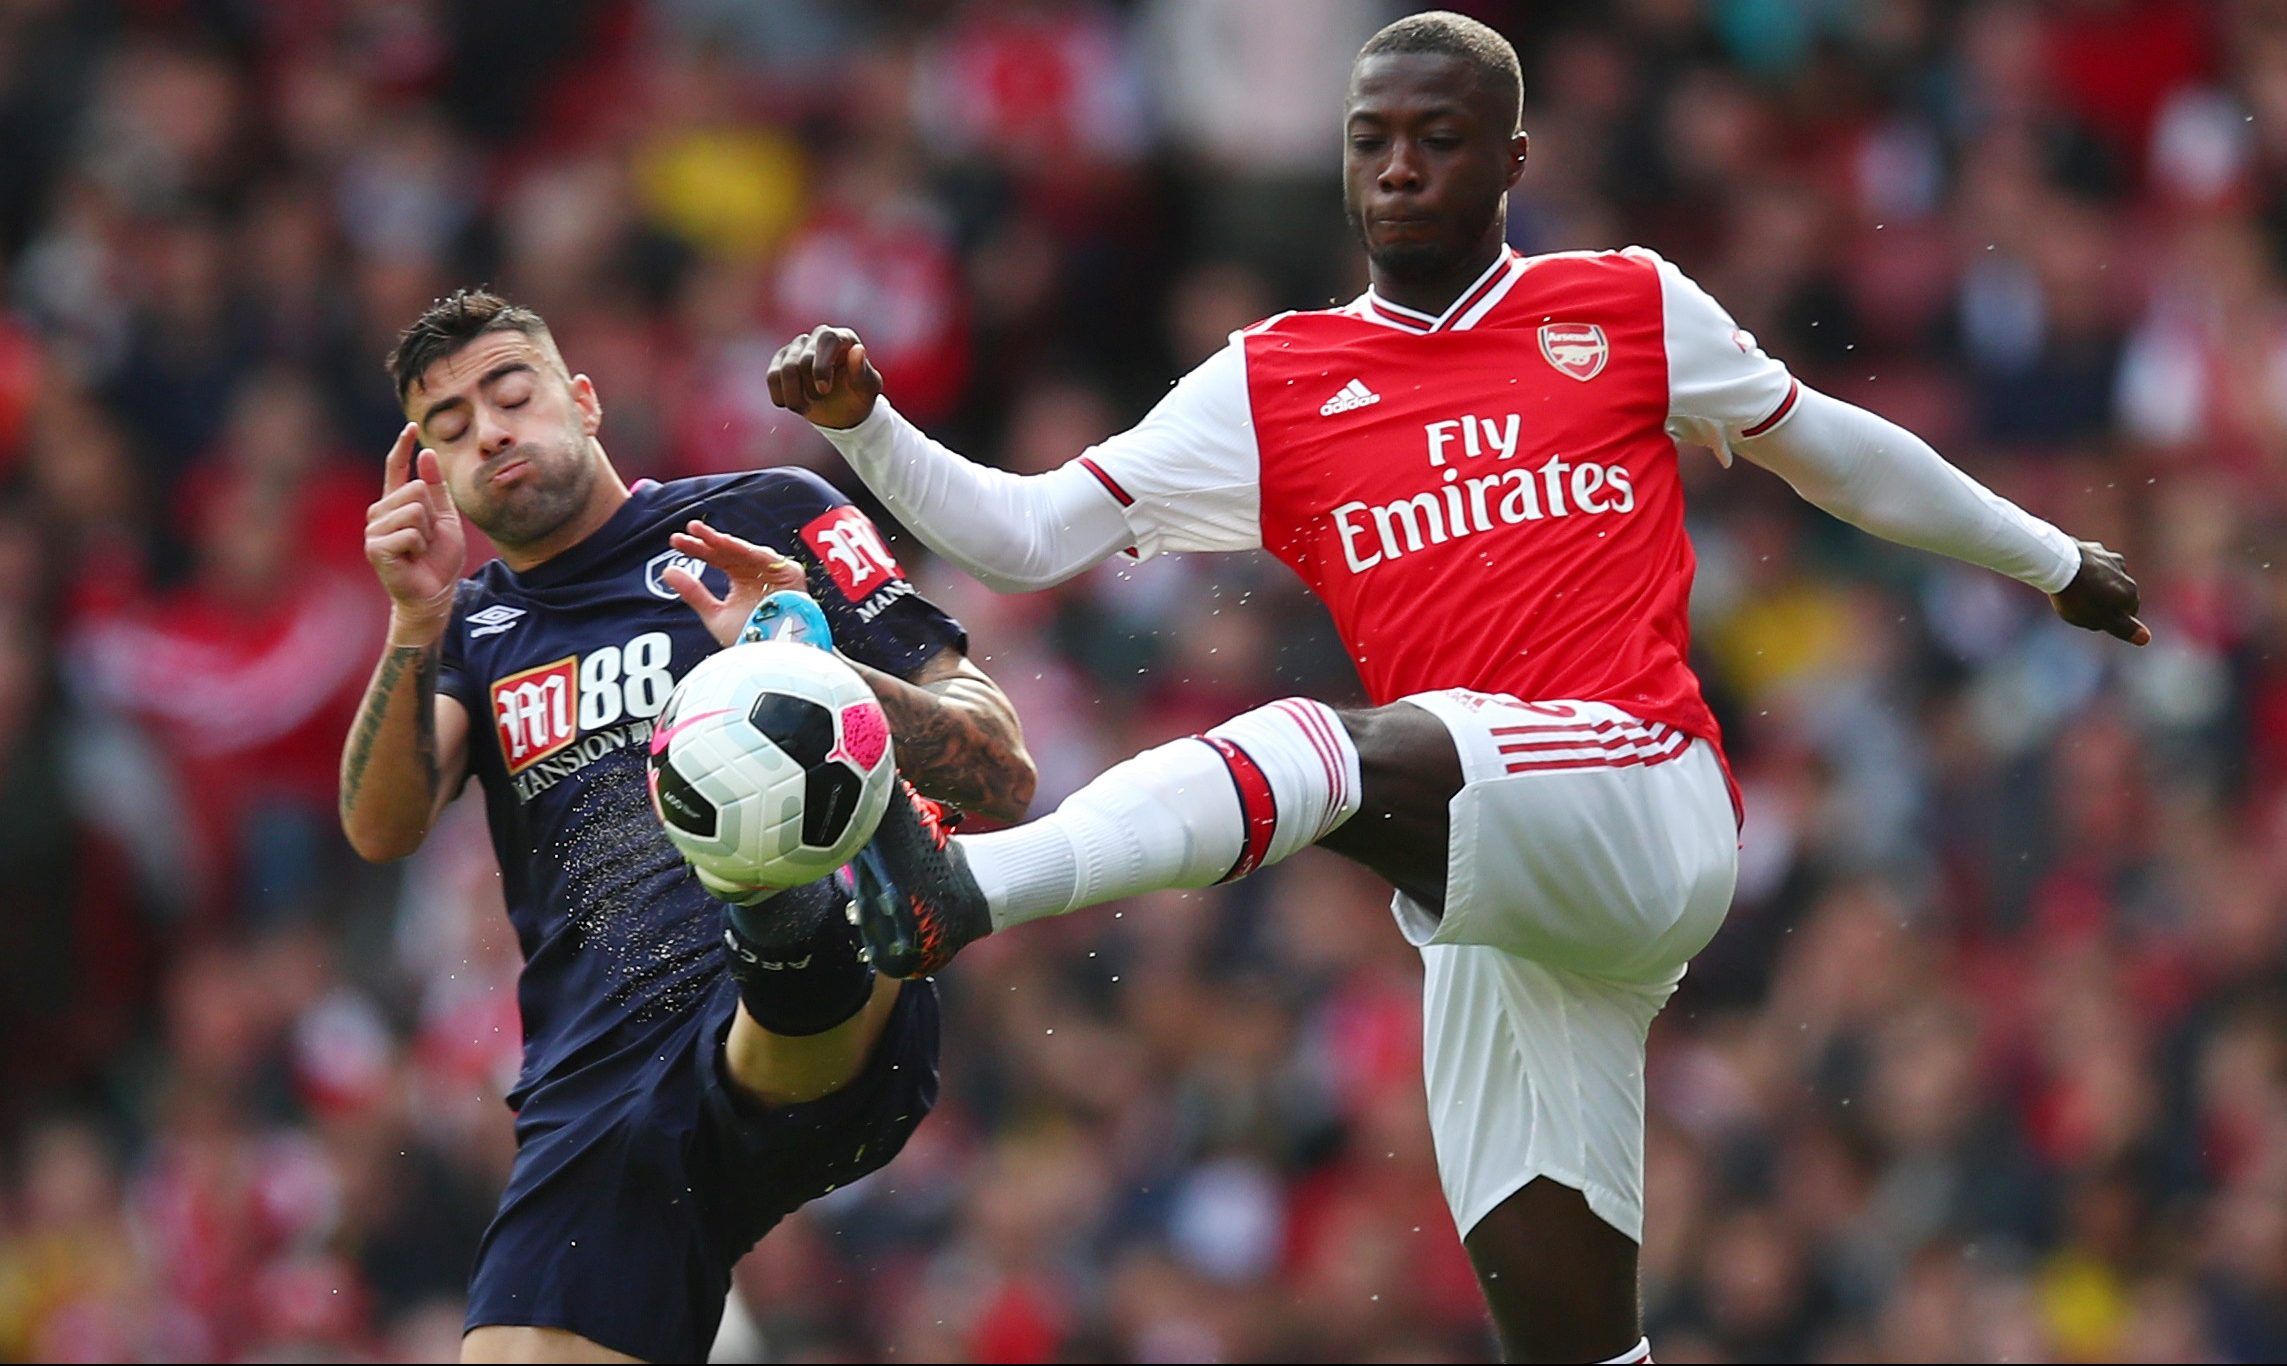 Soccer Football - Premier League - Arsenal v AFC Bournemouth - Emirates Stadium, London, Britain - October 6, 2019  Arsenal's Nicolas Pepe in action with Bournemouth's Diego Rico      REUTERS/Eddie Keogh  EDITORIAL USE ONLY. No use with unauthorized audio, video, data, fixture lists, club/league logos or 